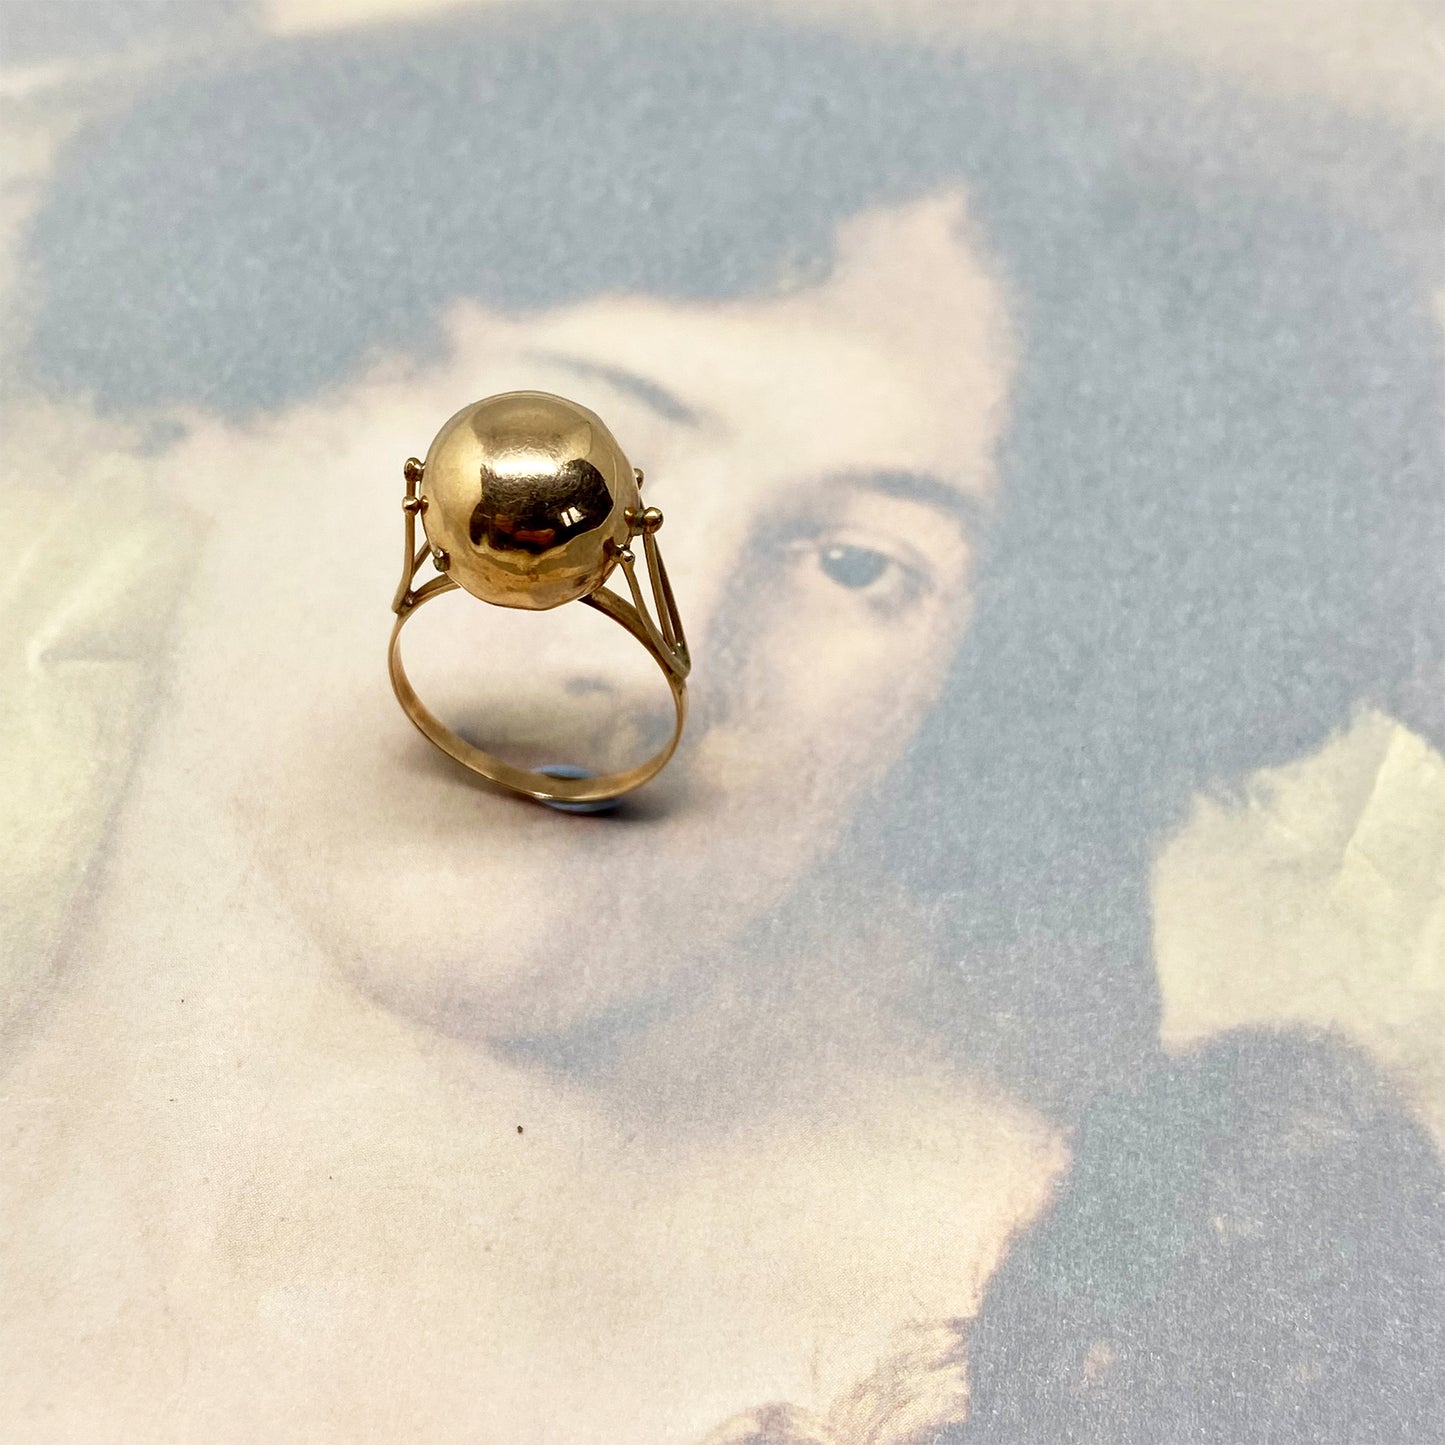 Vintage 9k Gold Ball Solitaire Ring